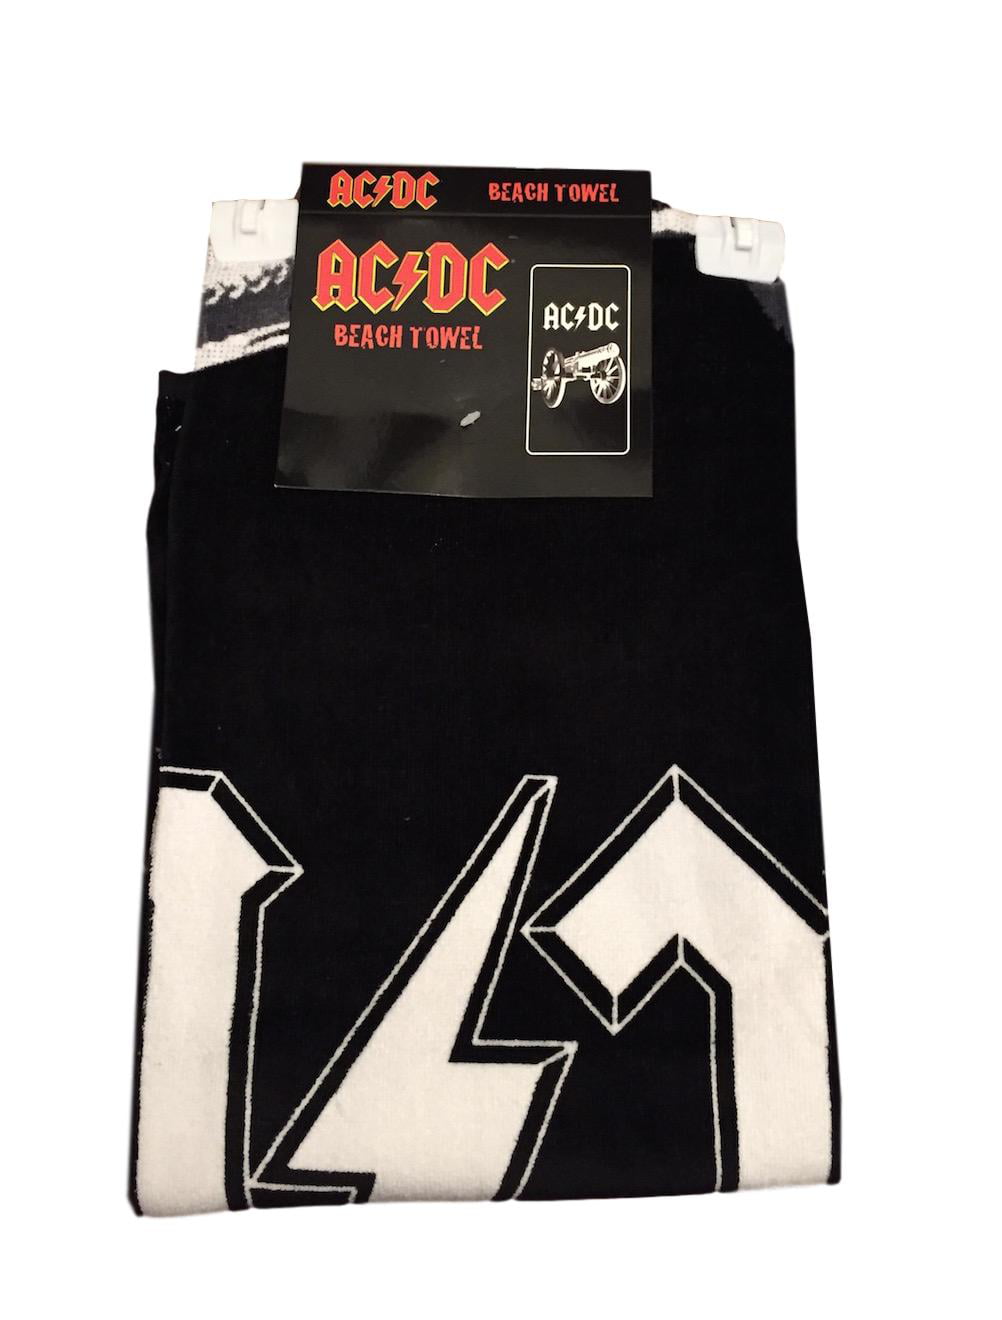 AC DC ACDC Rock Band ALBUM Covers Lightweight Beach Towel 